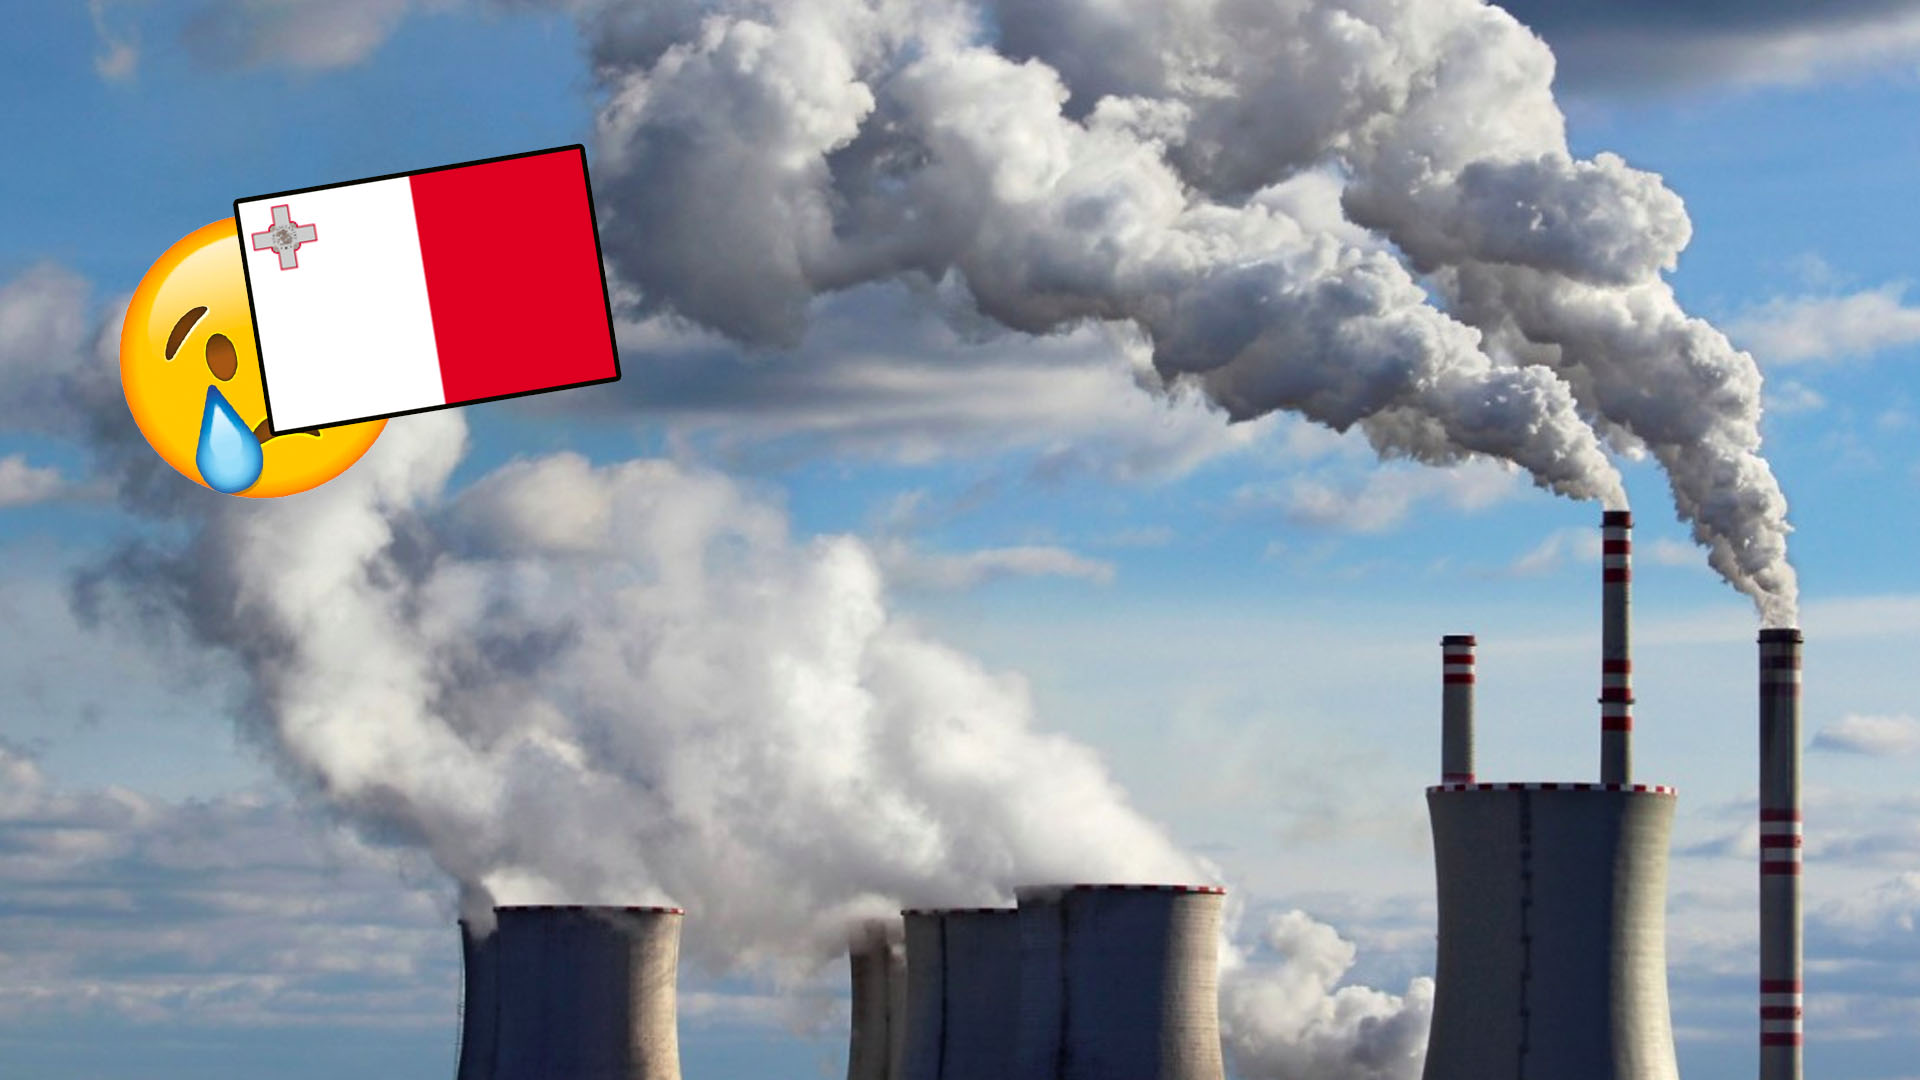 Malta with lowest CO2 emission reduction from EU countries in 2020